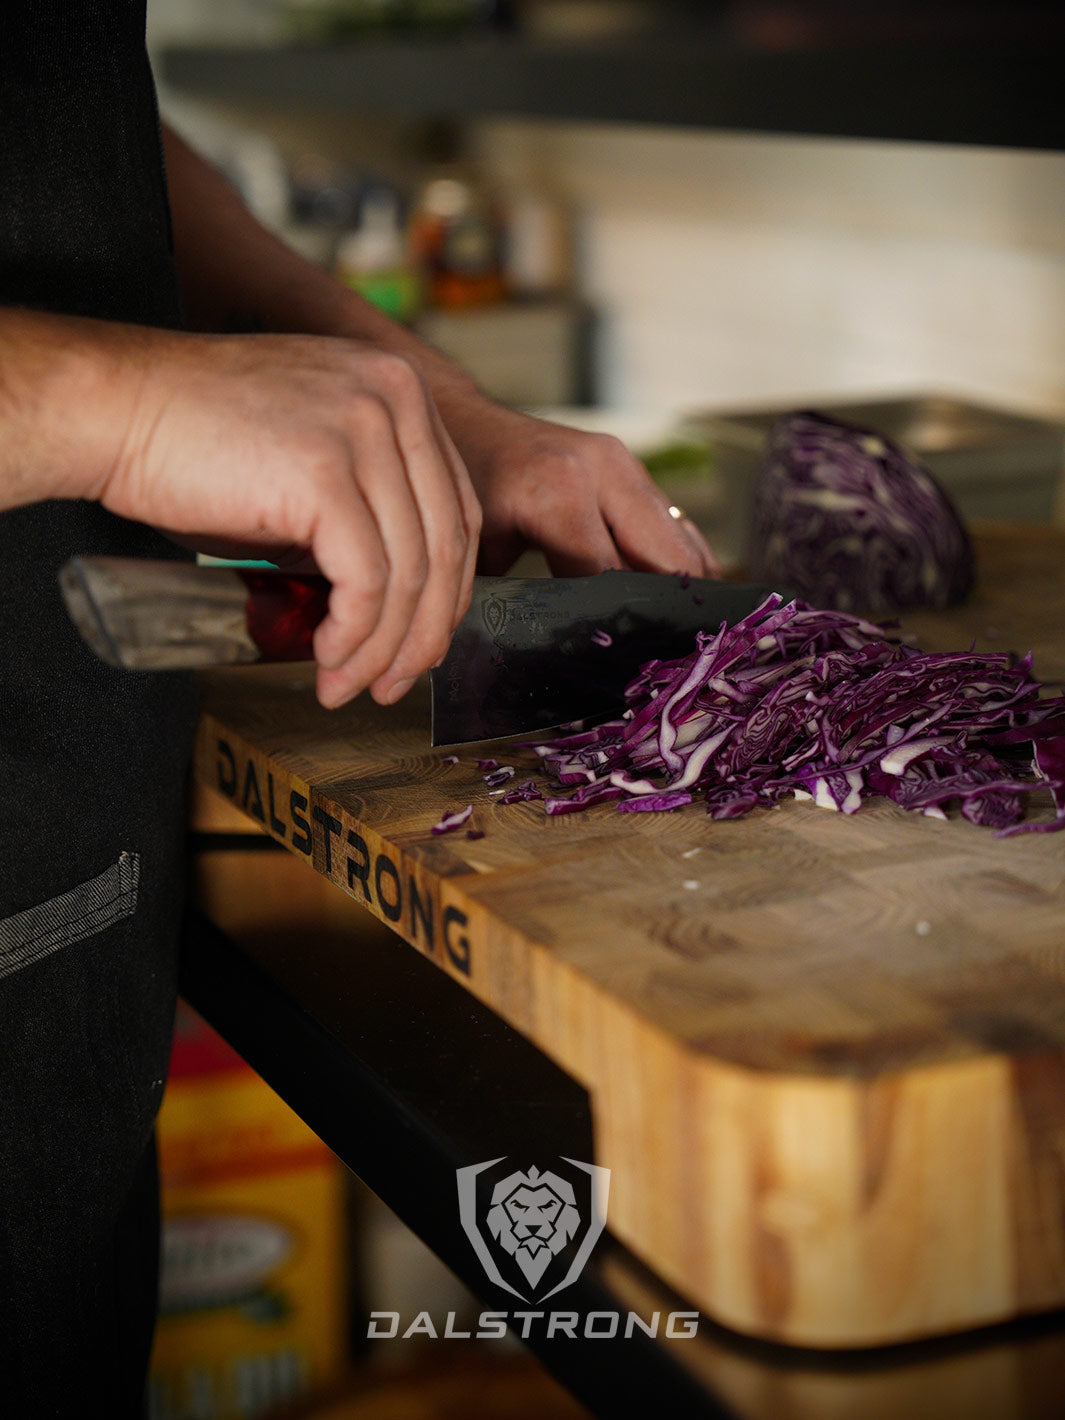 Dalstrong spartan ghost series 8 inch chef knife with a chopped violet cabbage on a cutting board.